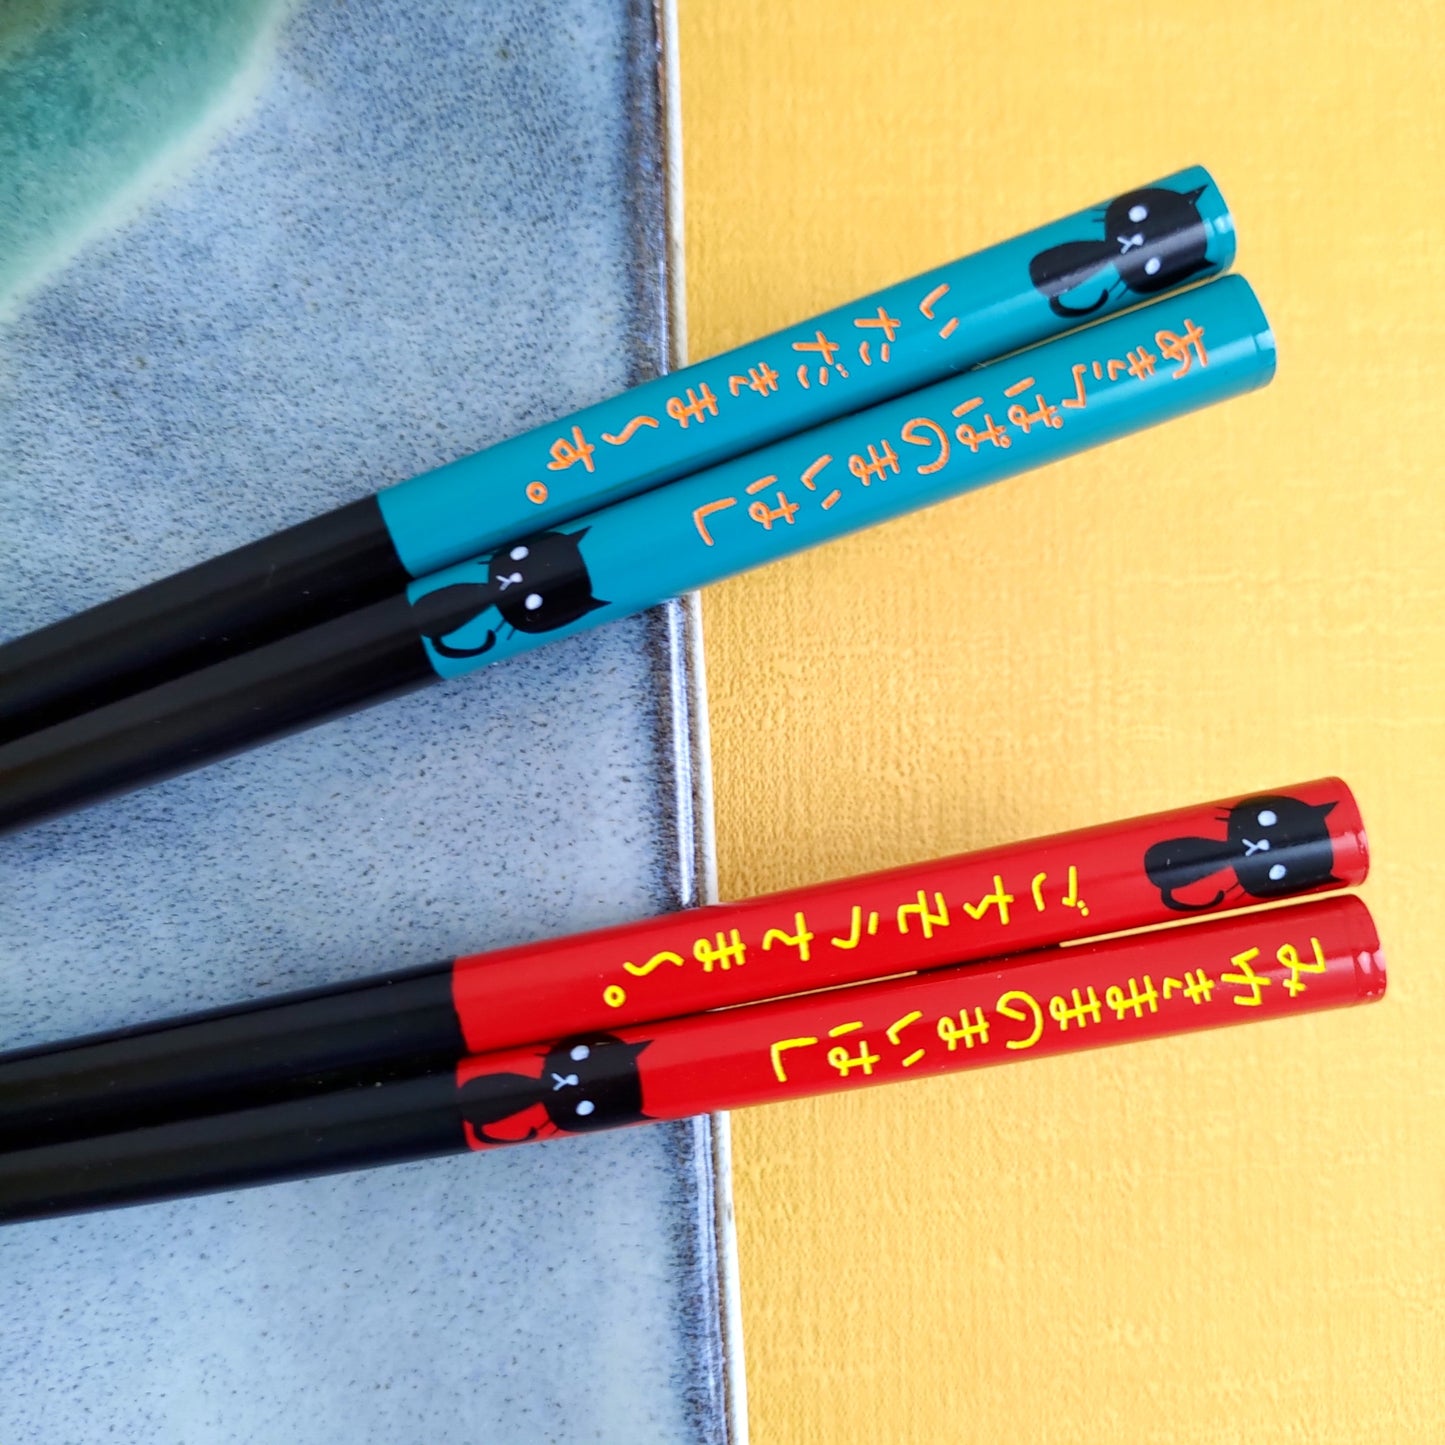 Black cat Japanese chopsticks blue red - DOUBLE PAIR WITH ENGRAVED WOODEN BOX SET